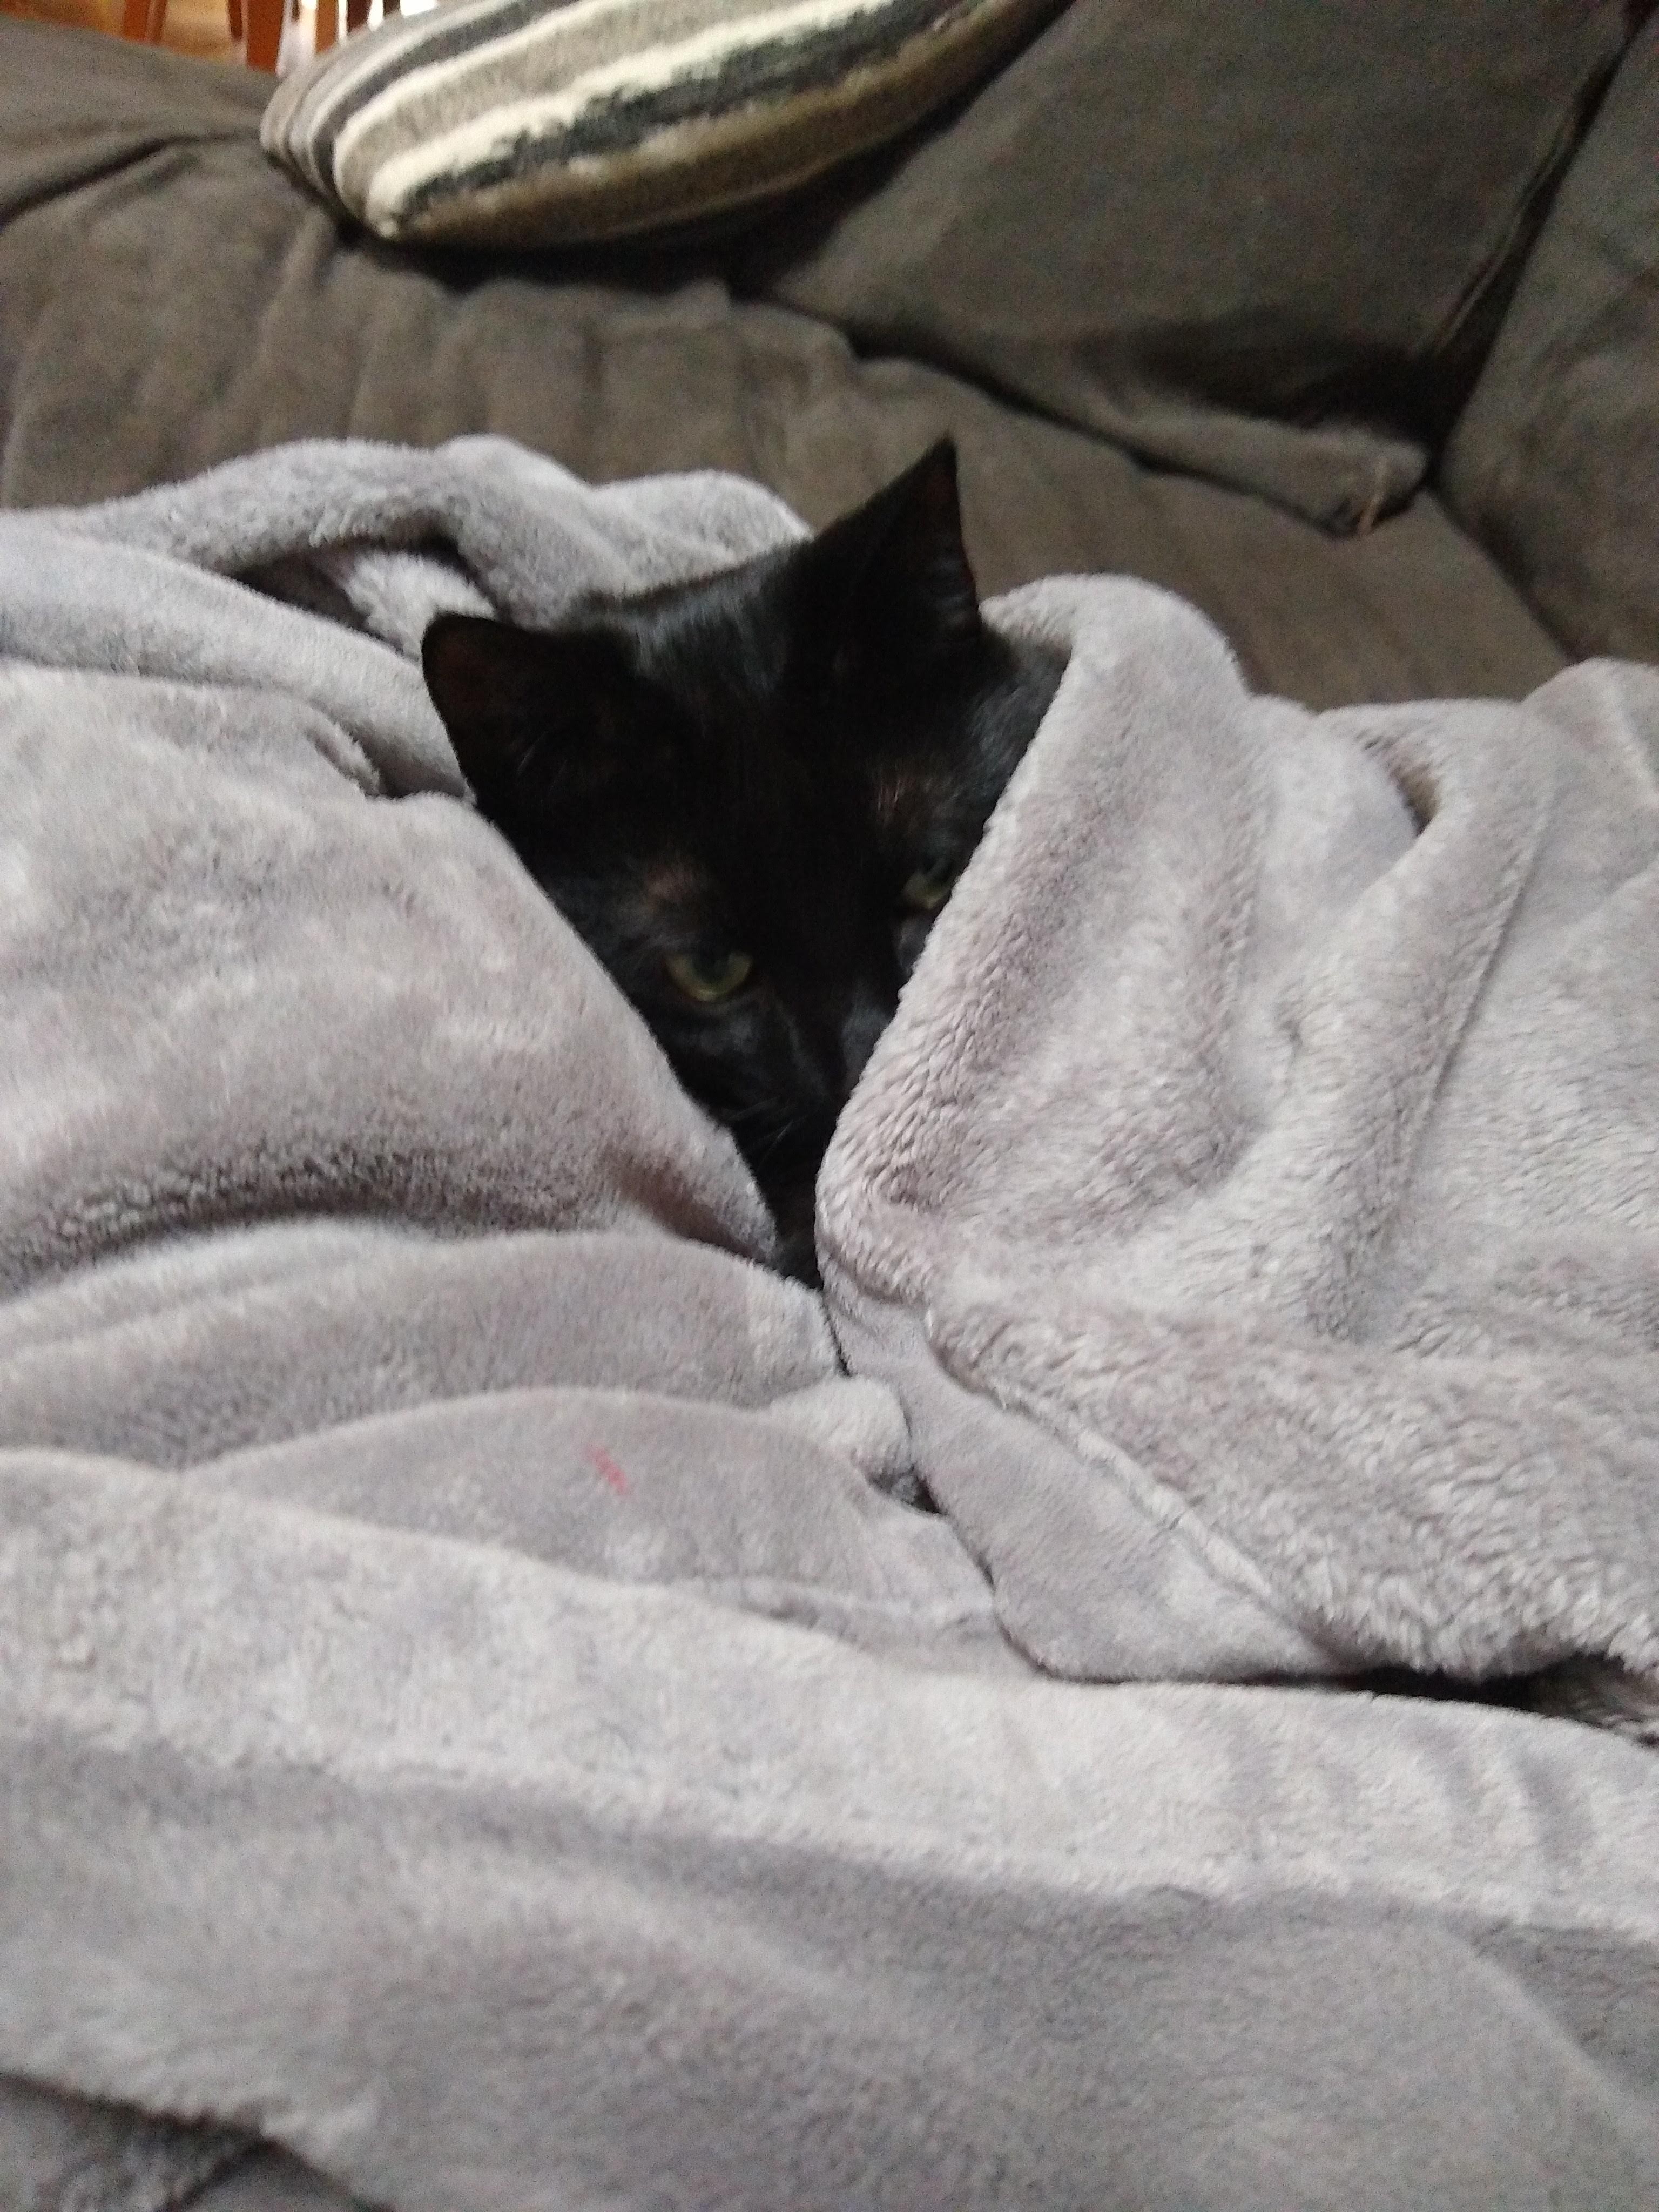 A photo of a black cat with green eyes. The cat is tucked up to the neck in a grey blanket and he looks sadly off to the side. End ID.